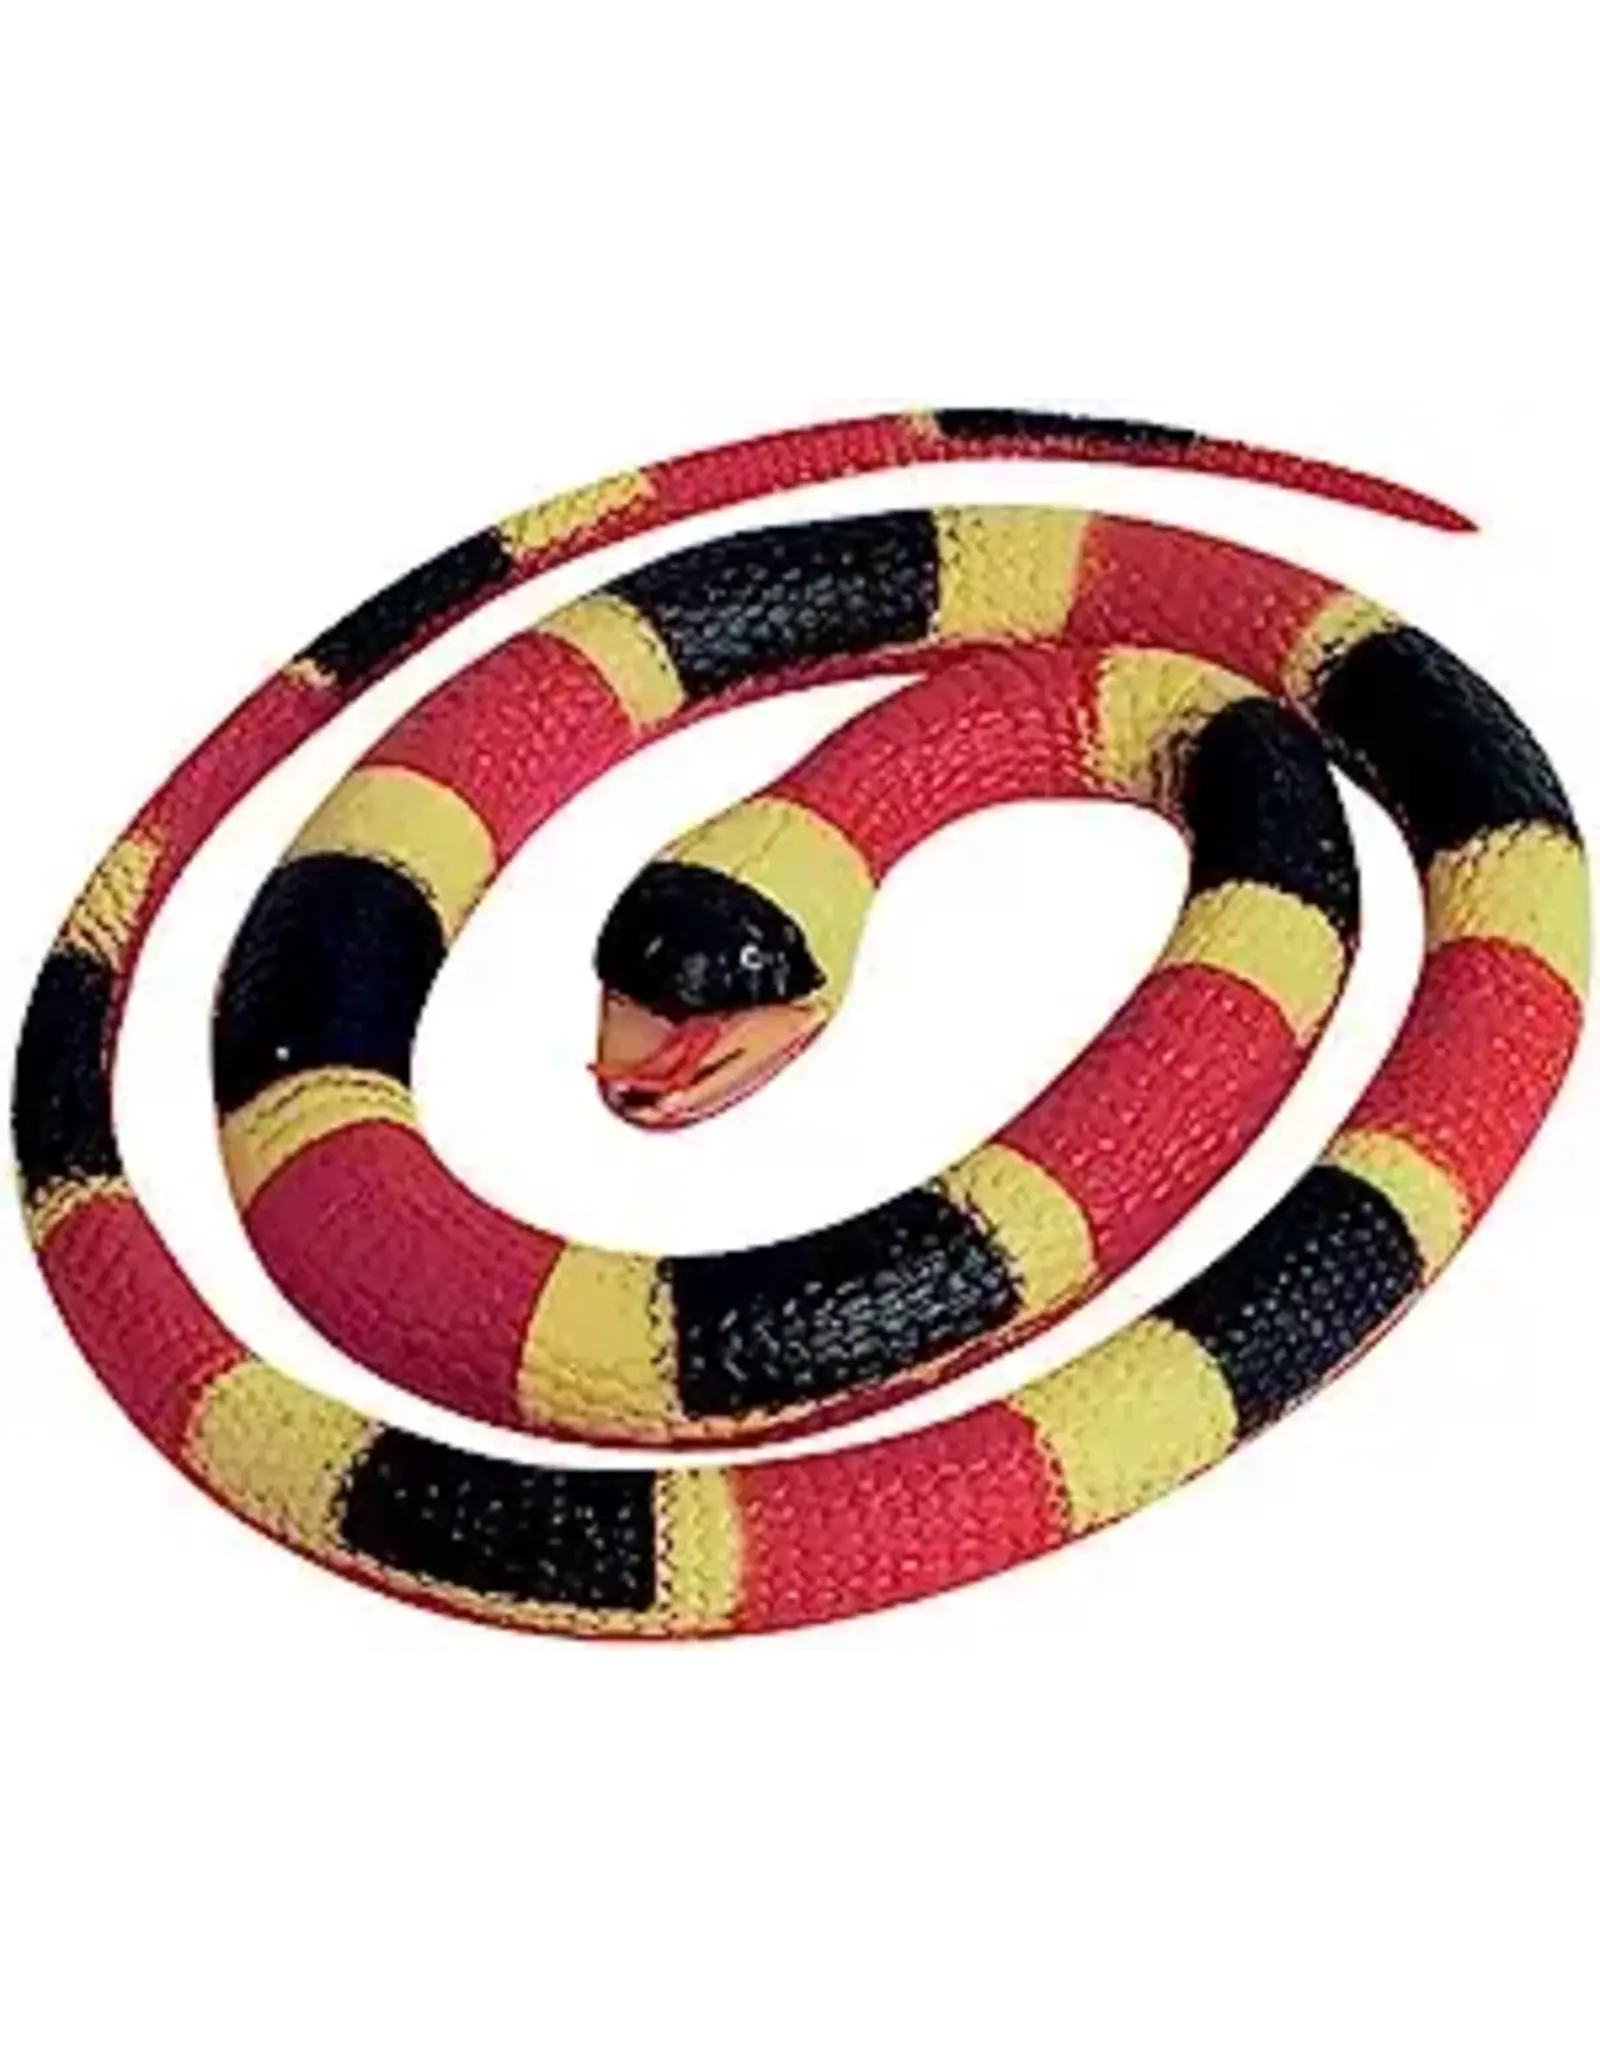 Rubber Snake - Coral